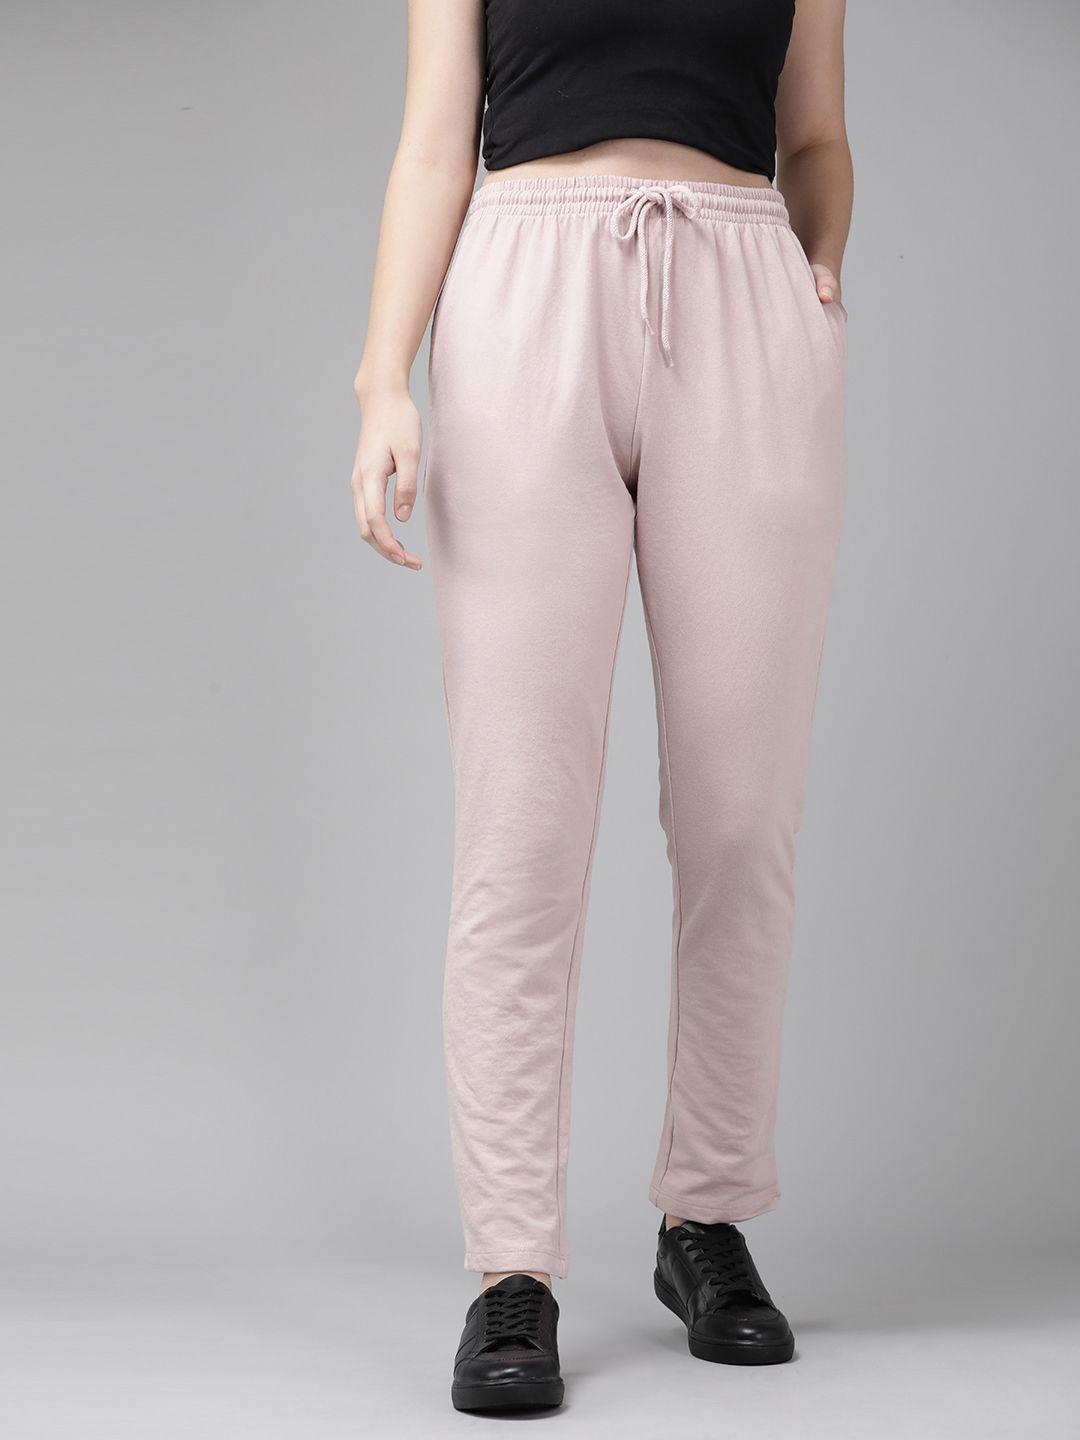 roadster-women-pink-solid-track-pants